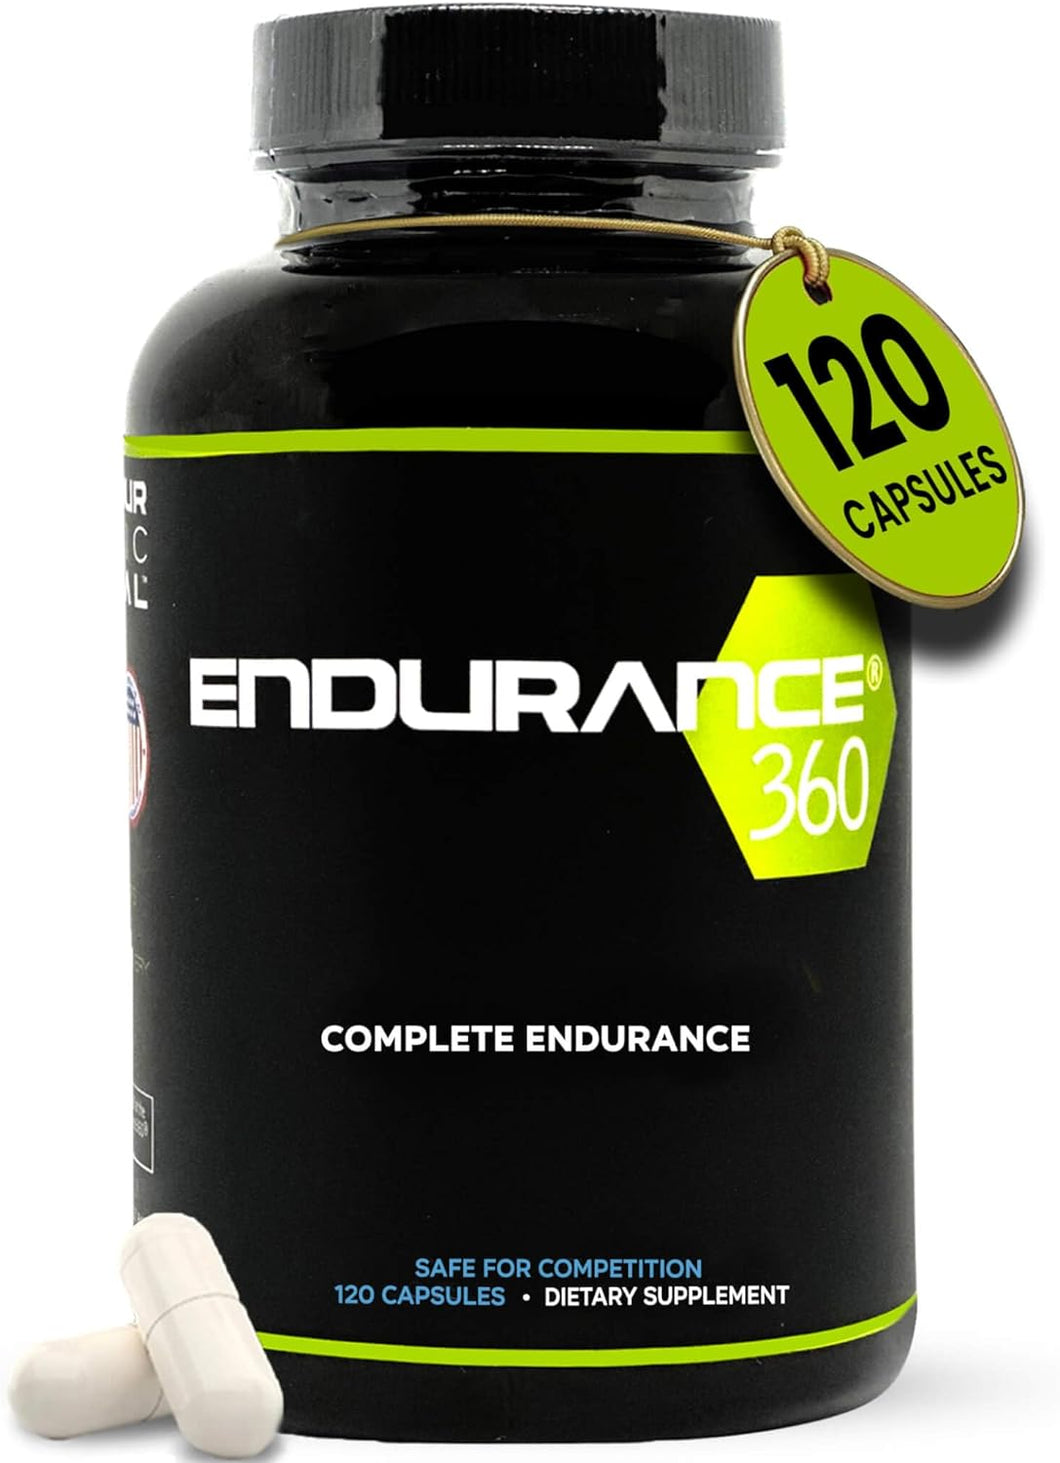 Endurance360 Complete - Fast Legs and Endurance with Advanced Aminos and Electrolytes, VO2 Max, Prevent Muscle Cramps, Buffer Lactic Acid